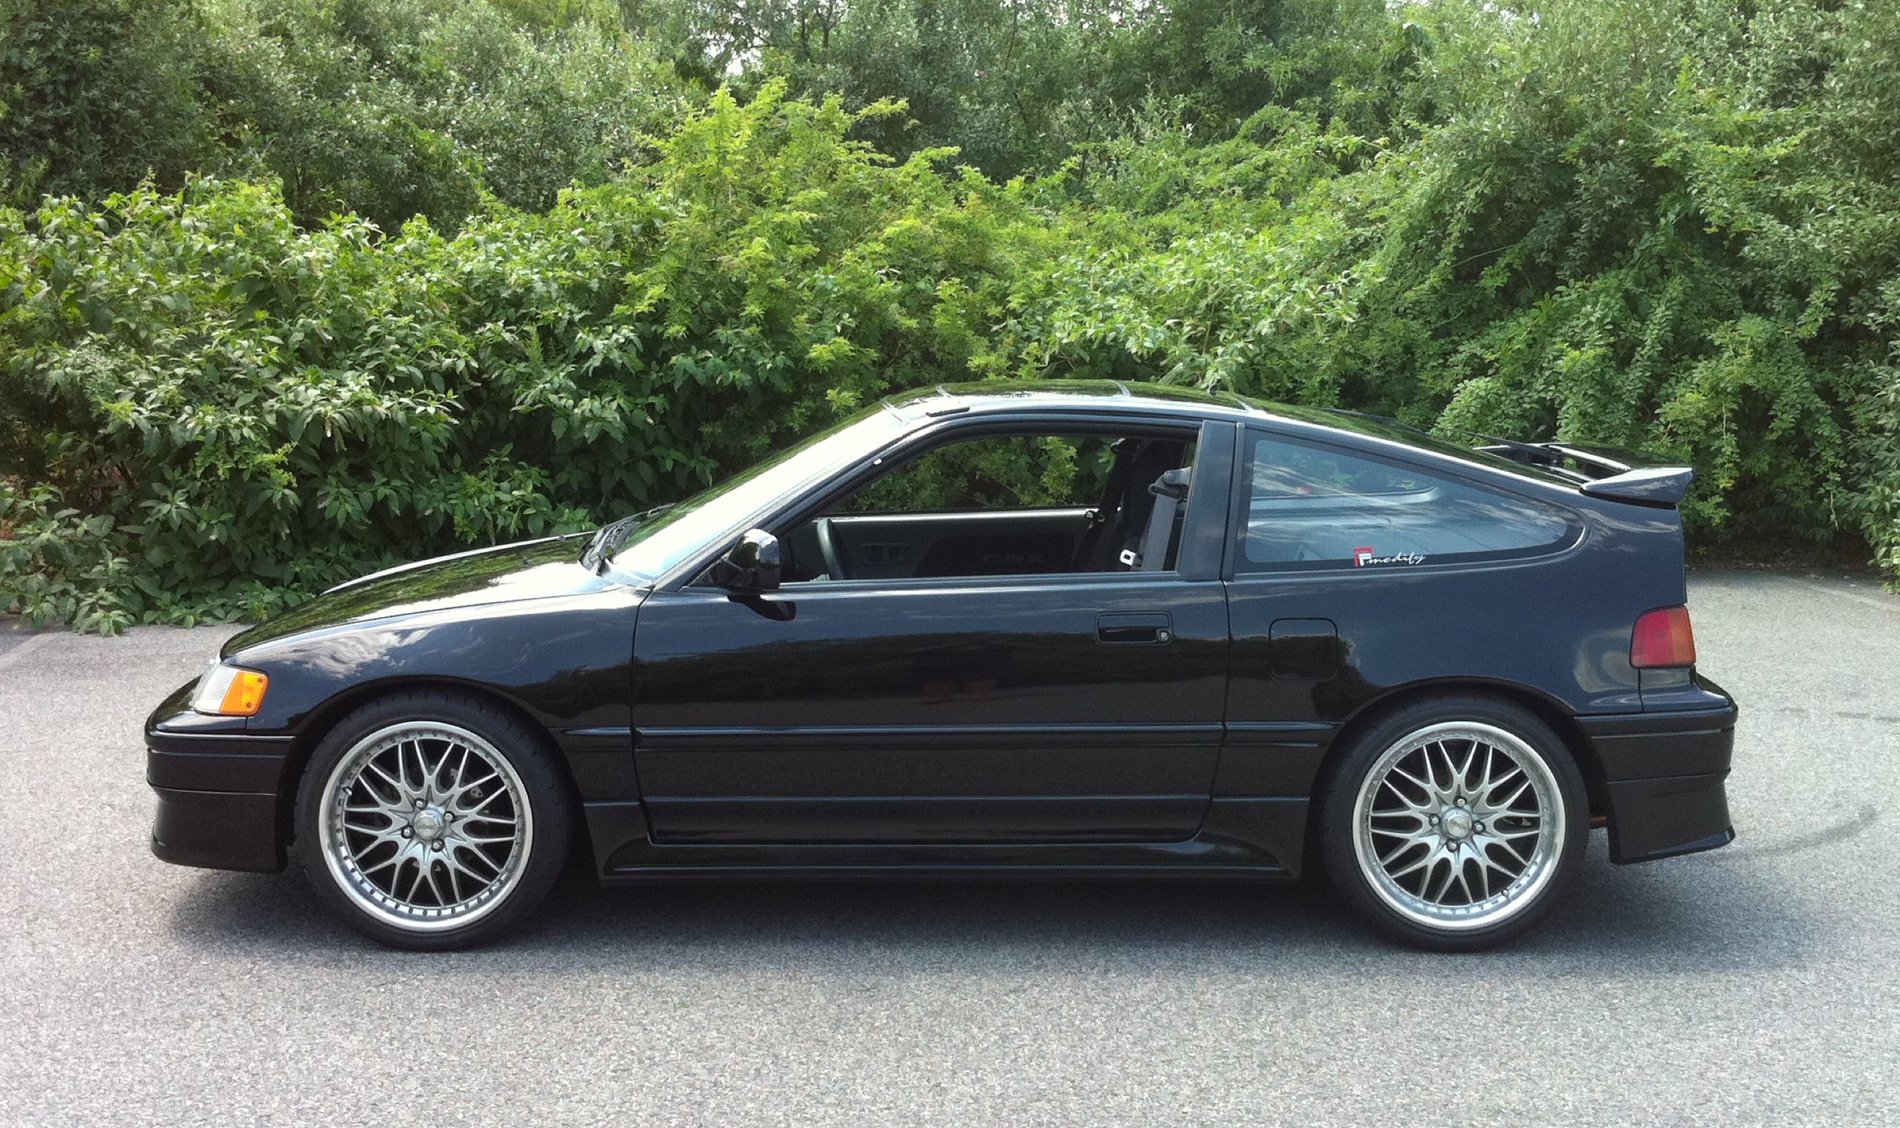 S650 Mustang Post Pictures of Your Car crx (4)